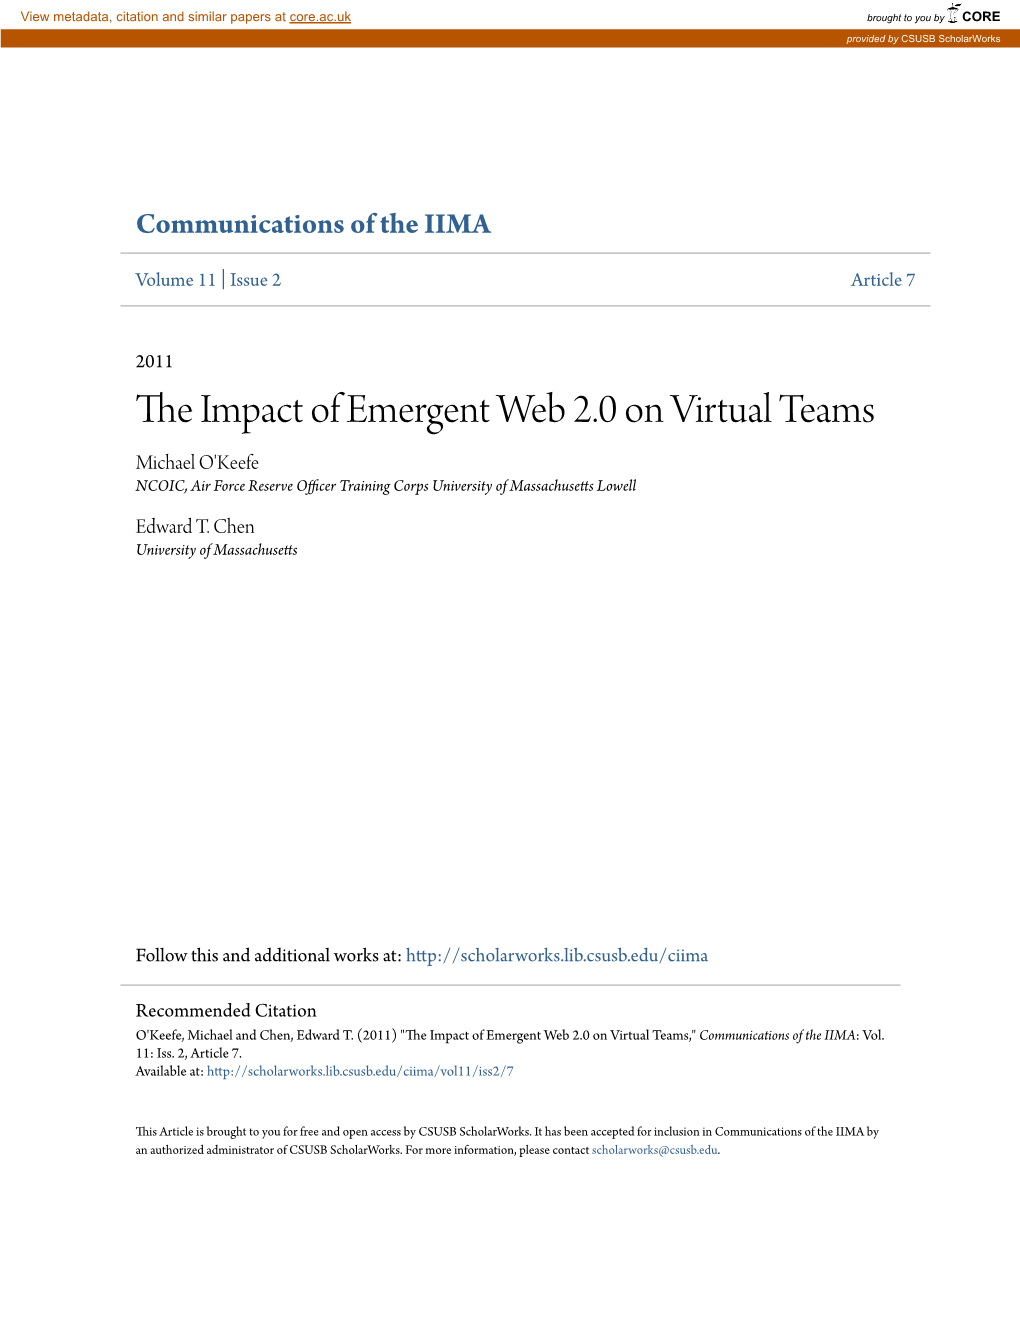 The Impact of Emergent Web 2.0 on Virtual Teams O’Keefe & Chen